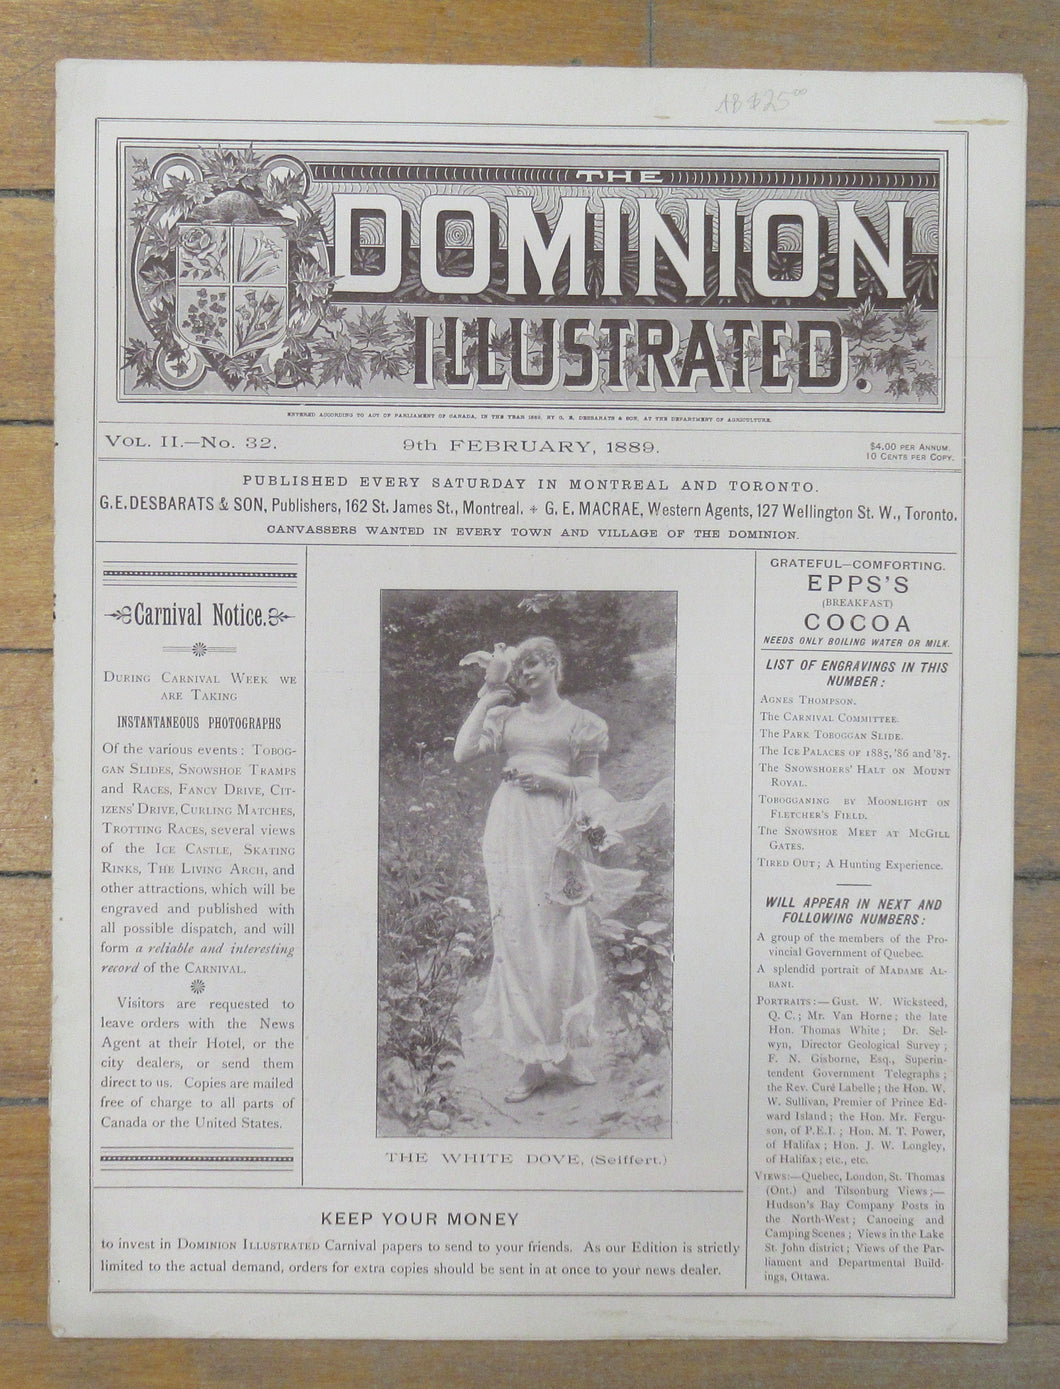 The Dominion Illustrated. 9th February, 1889